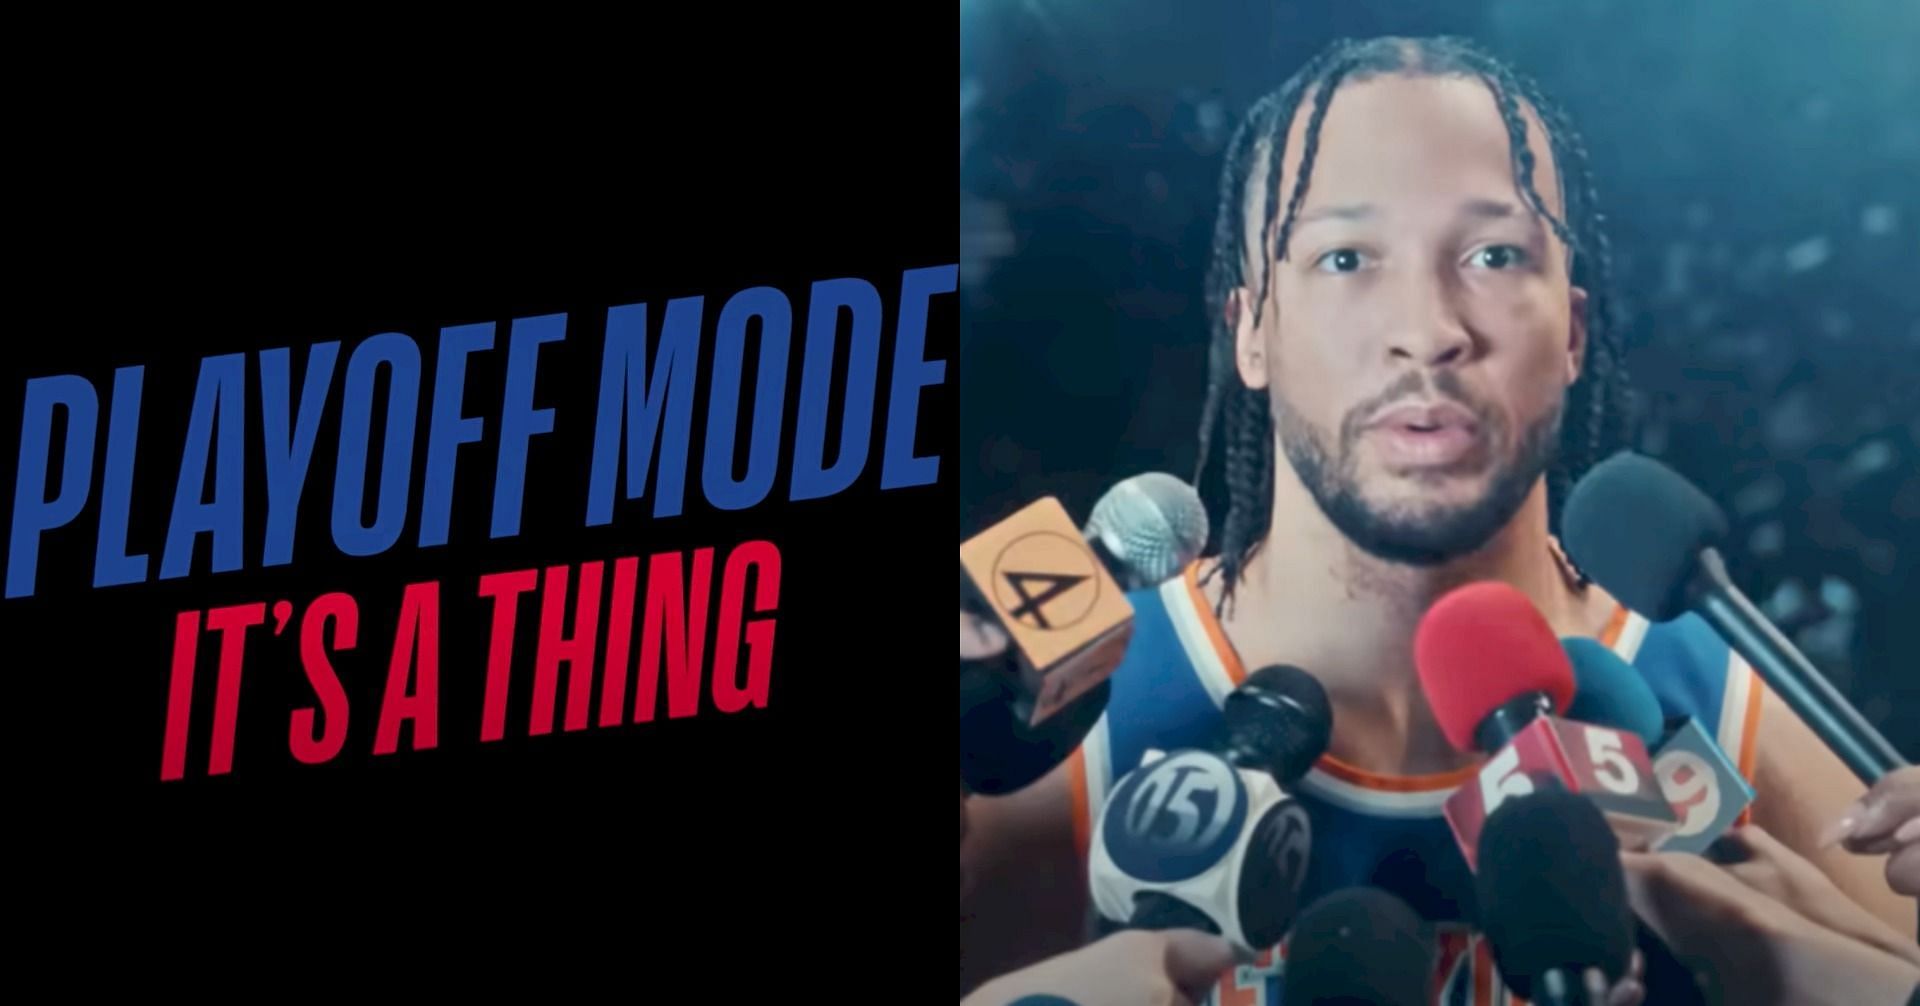 Listing every NBA All-Star in &quot;Playoff Mode&quot; commercial